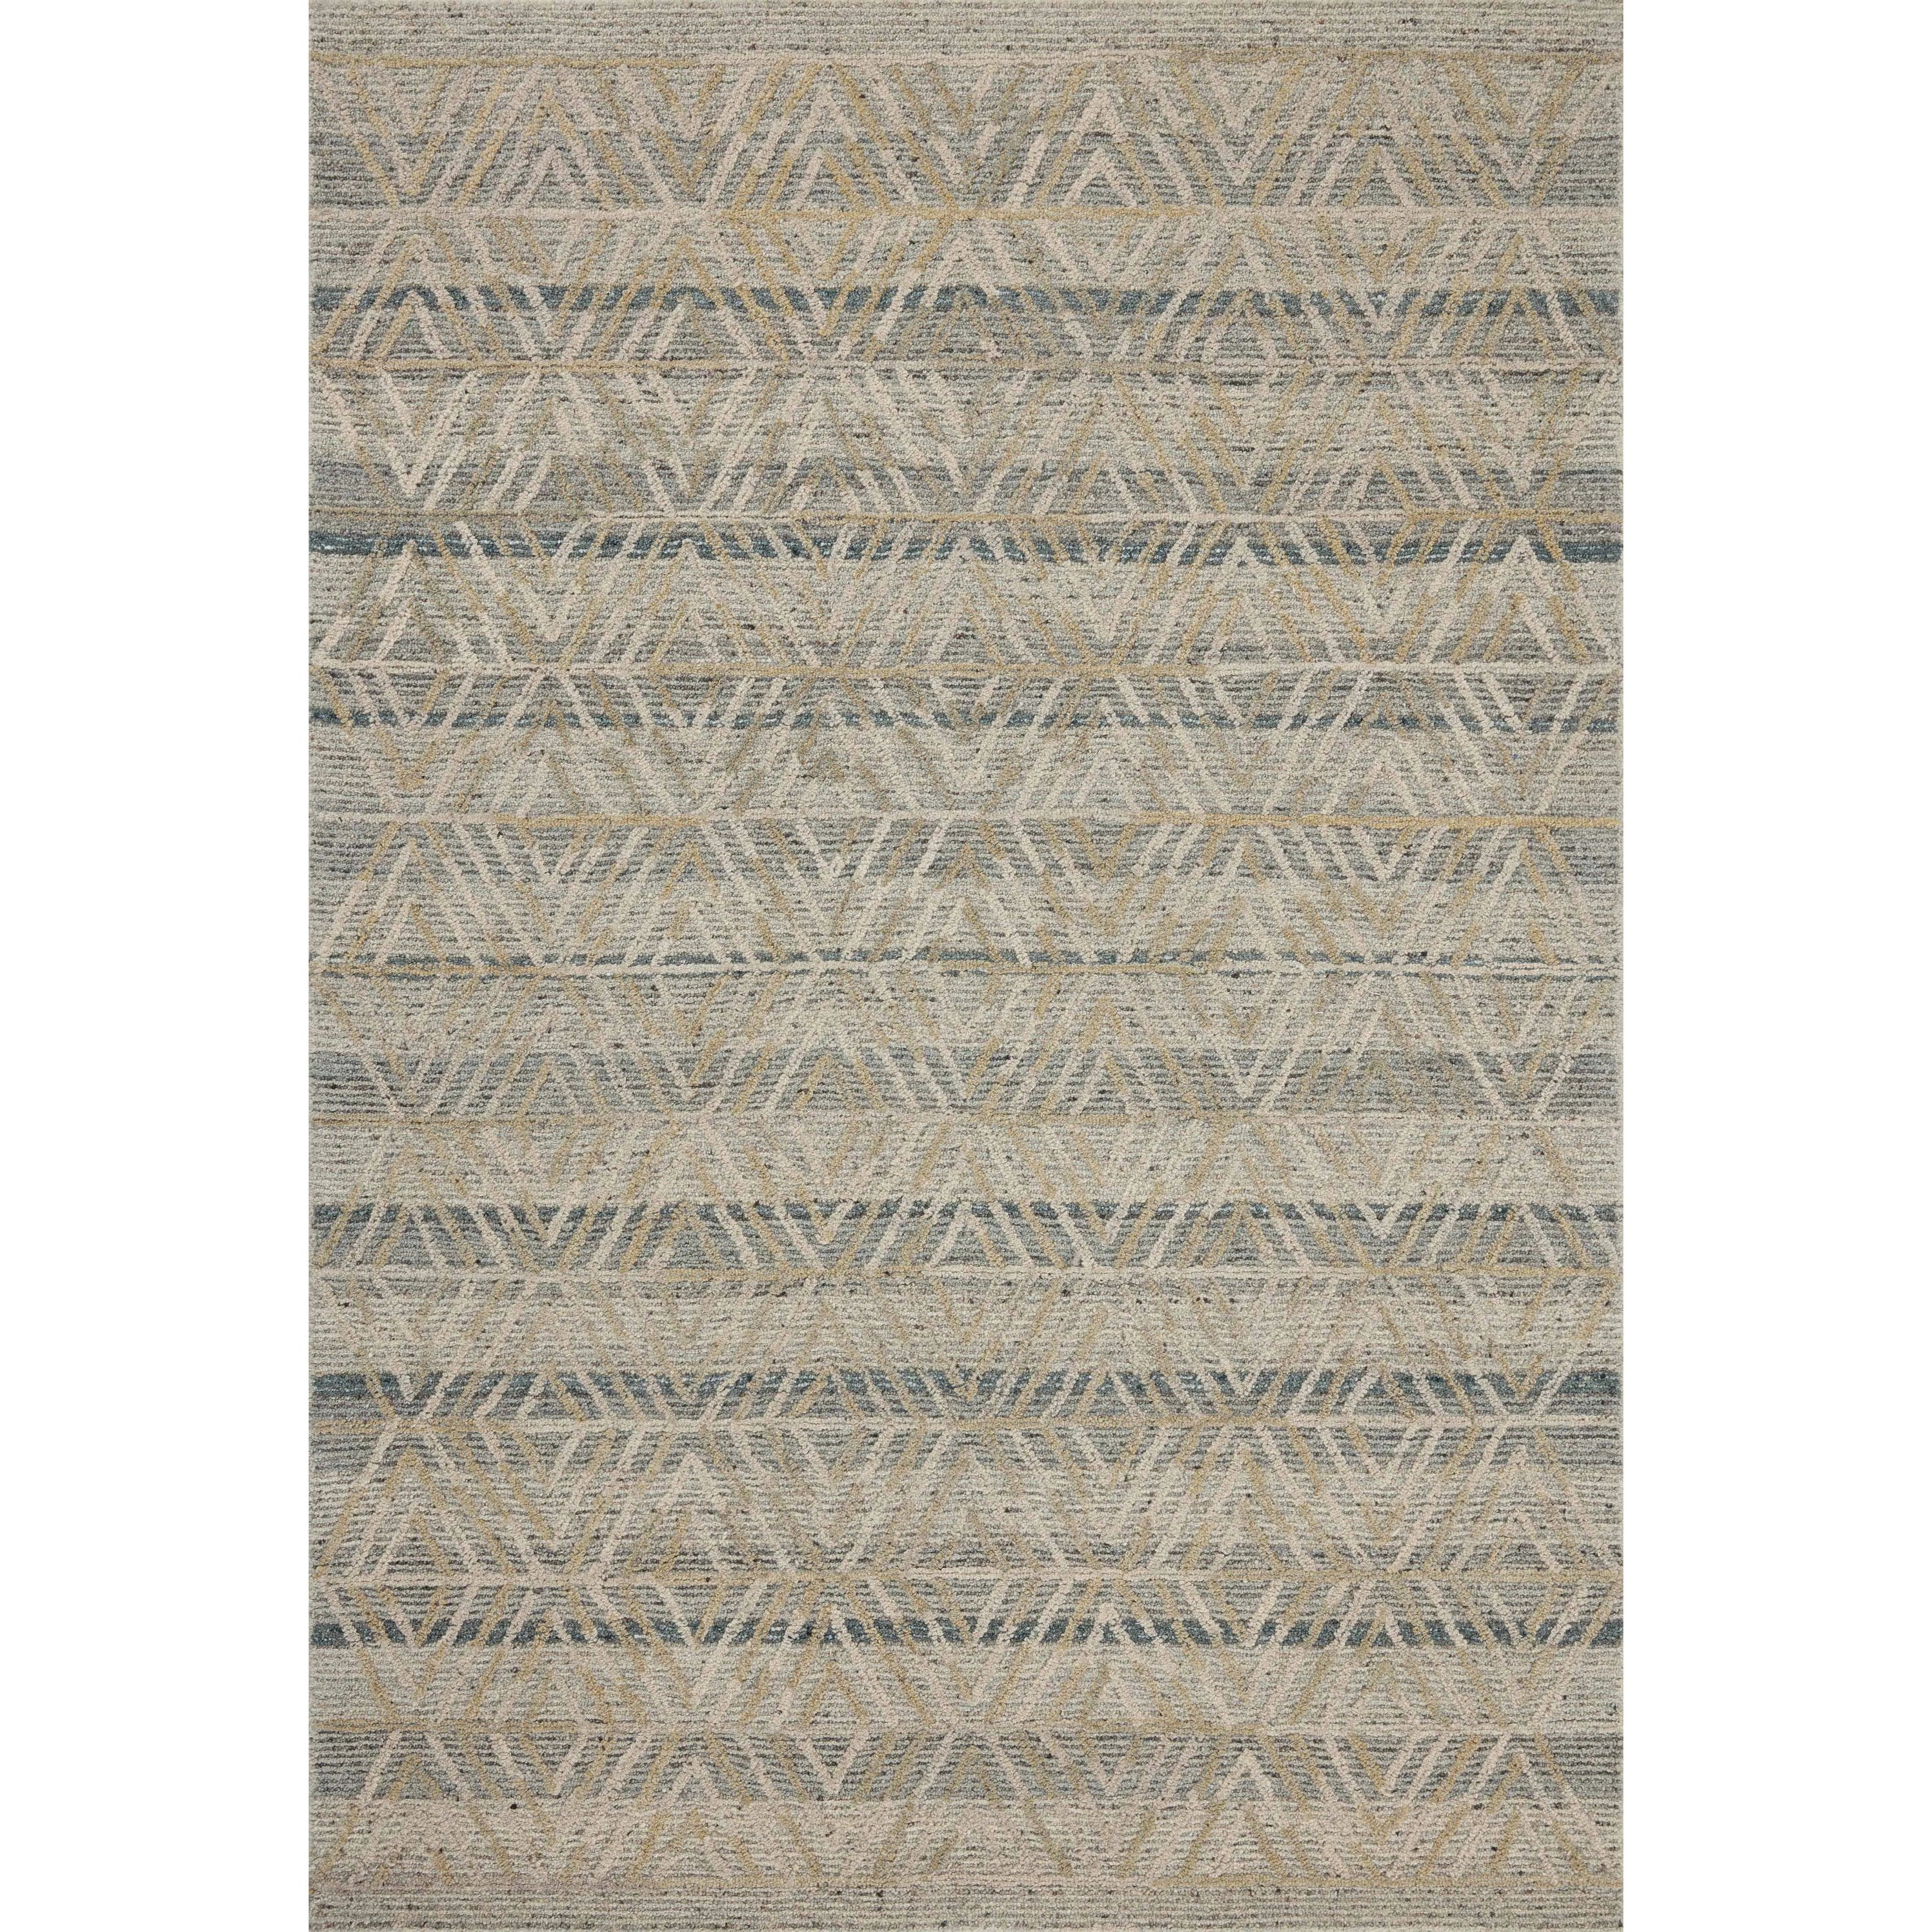 The Elias Fog / Natural Rug is a hand-tufted wool area rug with lively graphic patterns in earth and stone tones. There’s a unique texture to the rug made by over-tufting, in which a design is hand-tufted over a tufted base, creating a subtle high-low pile. Amethyst Home provides interior design, new home construction design consulting, vintage area rugs, and lighting in the Monterey metro area.